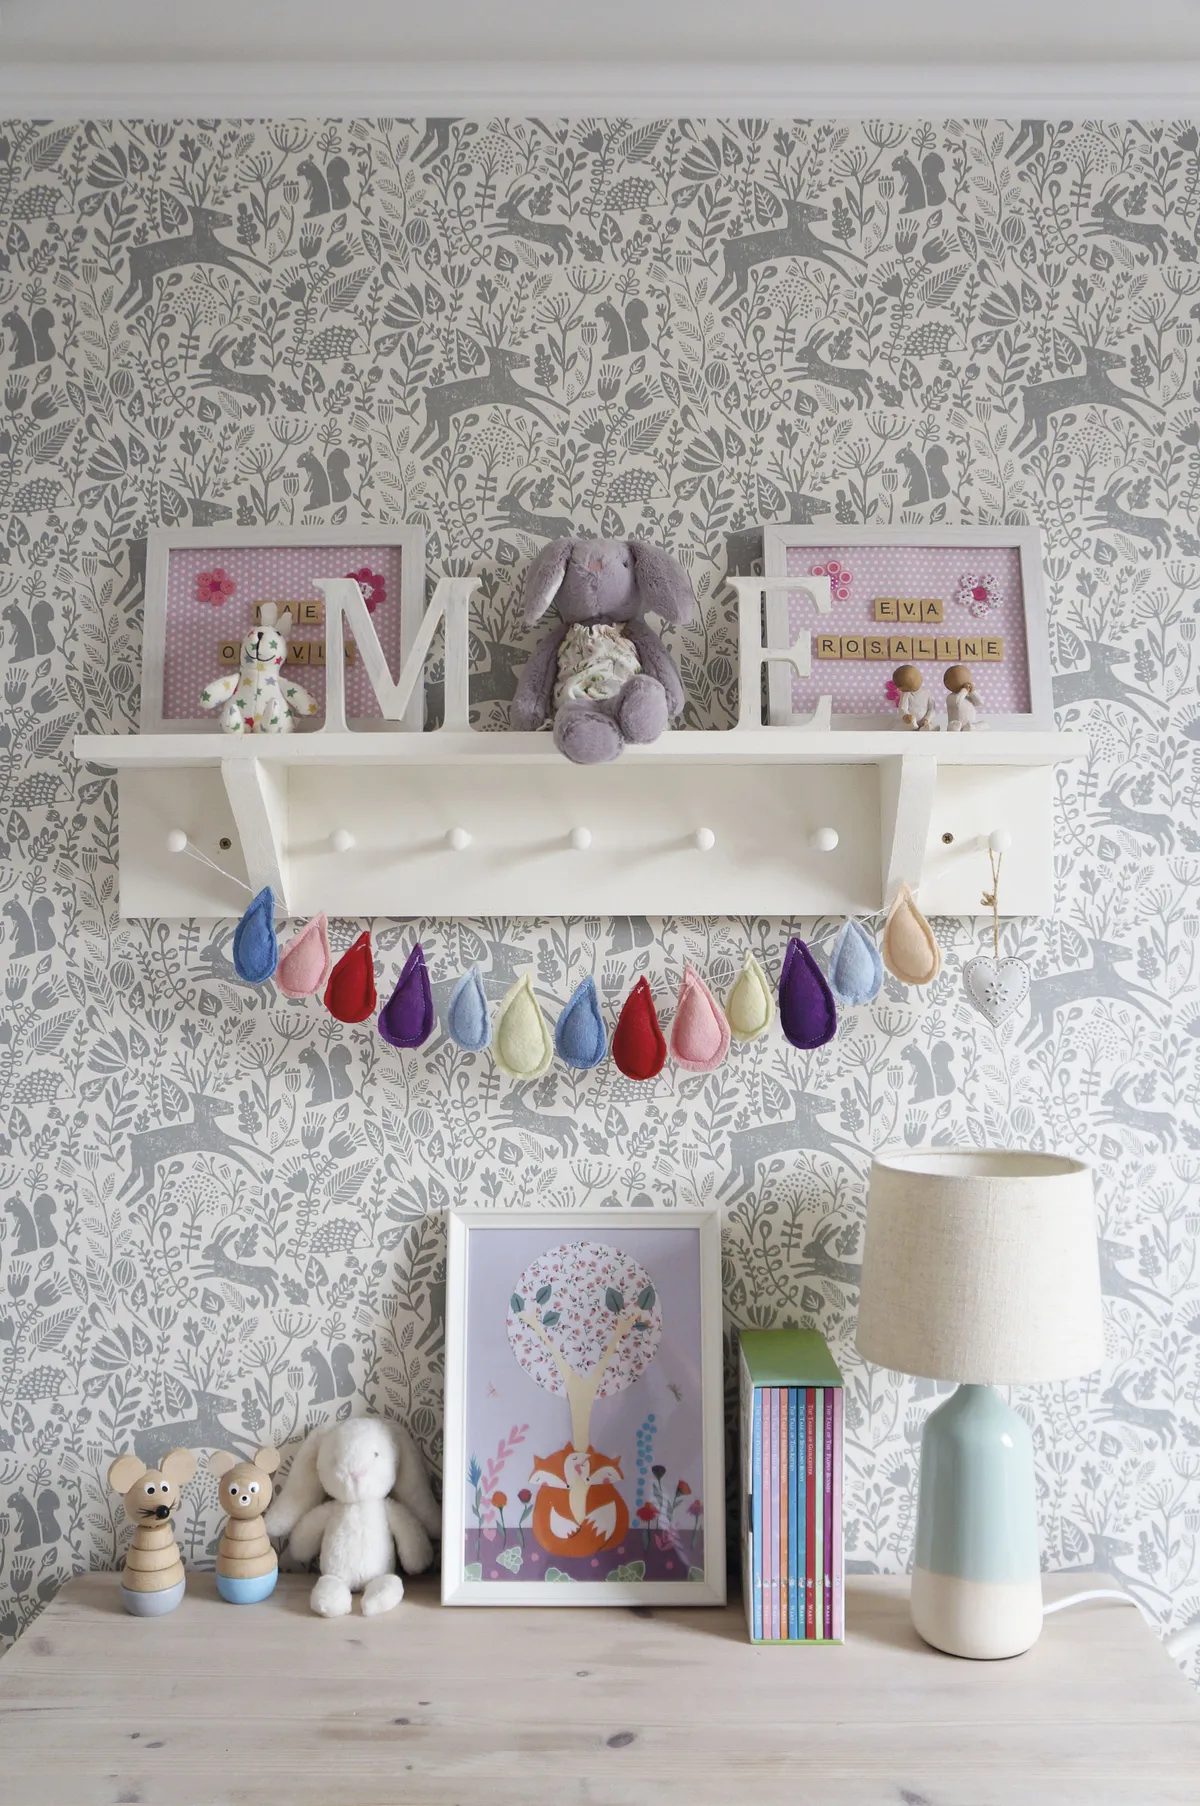 ‘I definitely embraced a pink colour scheme in the girls’ bedroom,’ says Jade. ‘The Scion Kelda wallpaper in Pewter was a recent addition and I think it really finishes off the room.’